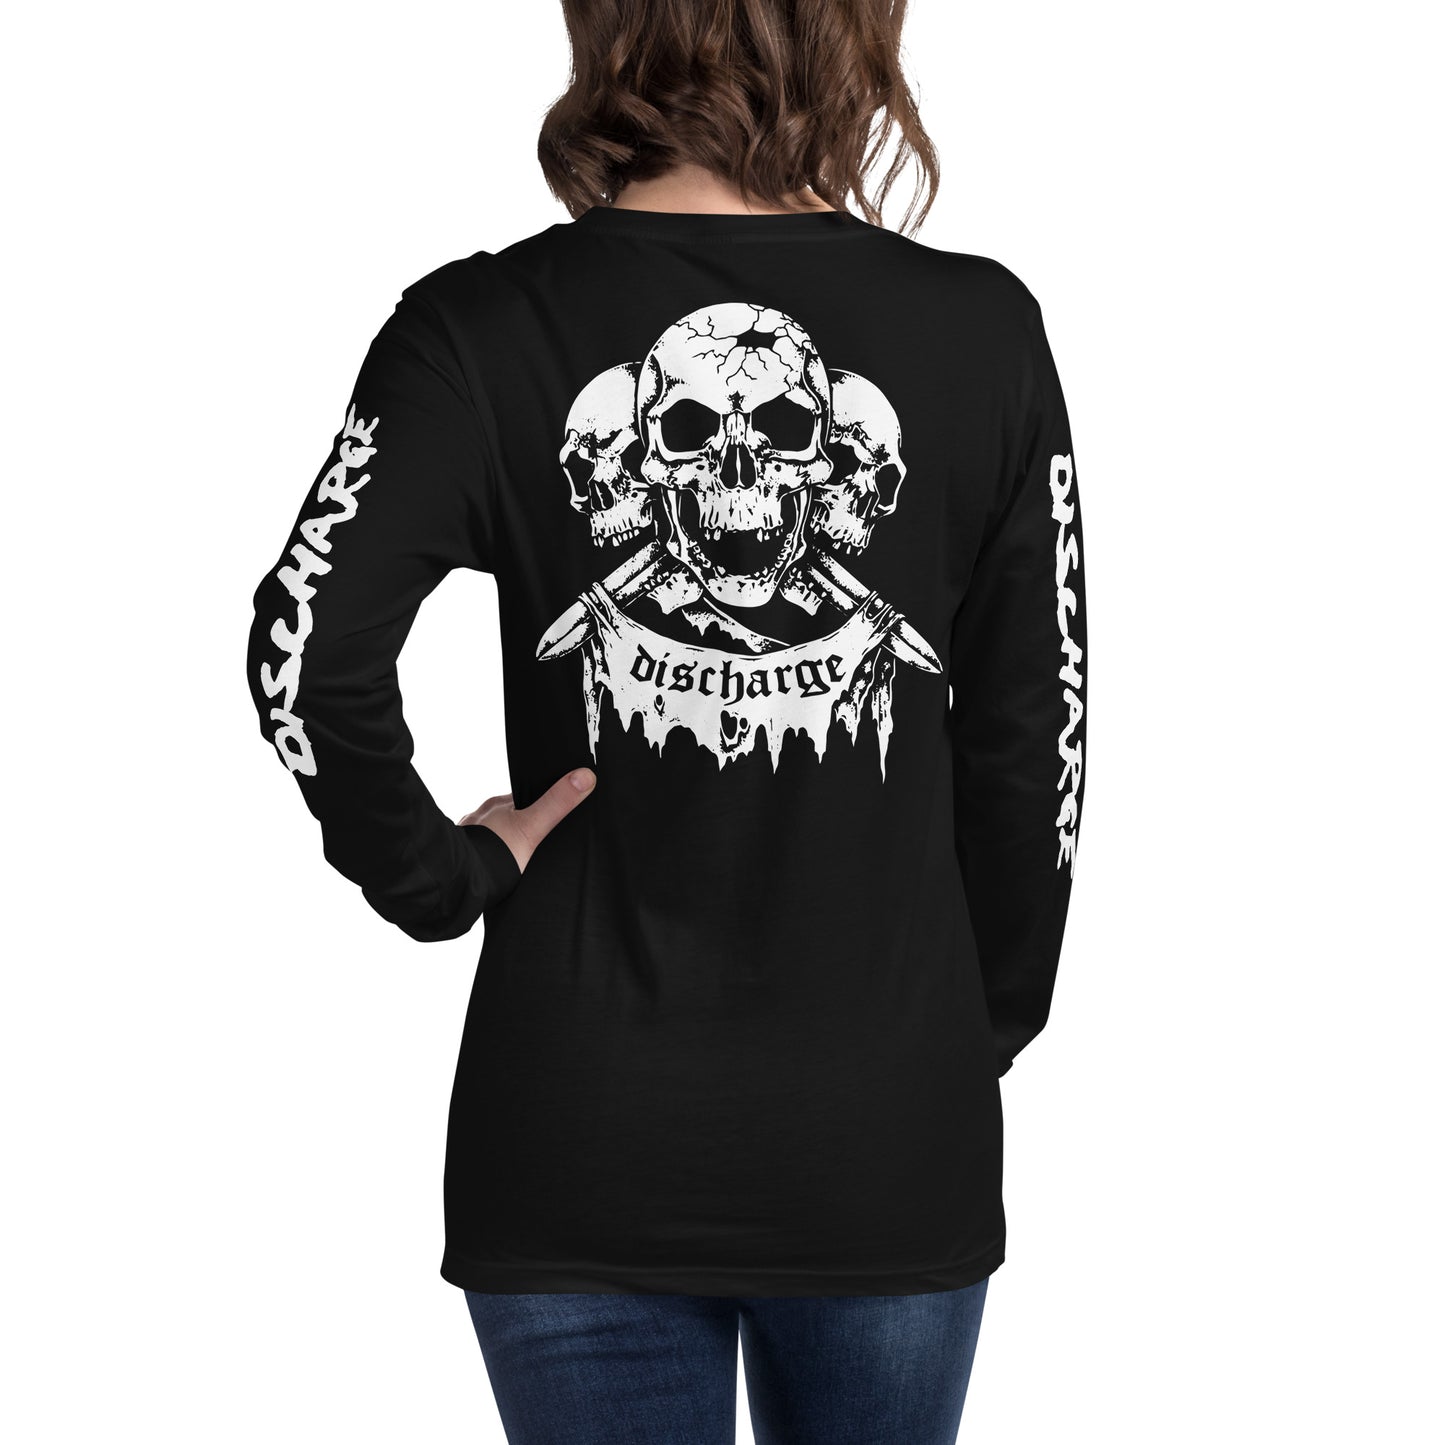 Discharge - Hear Nothing See Nothing Say Nothing Long Sleeve T-Shirt